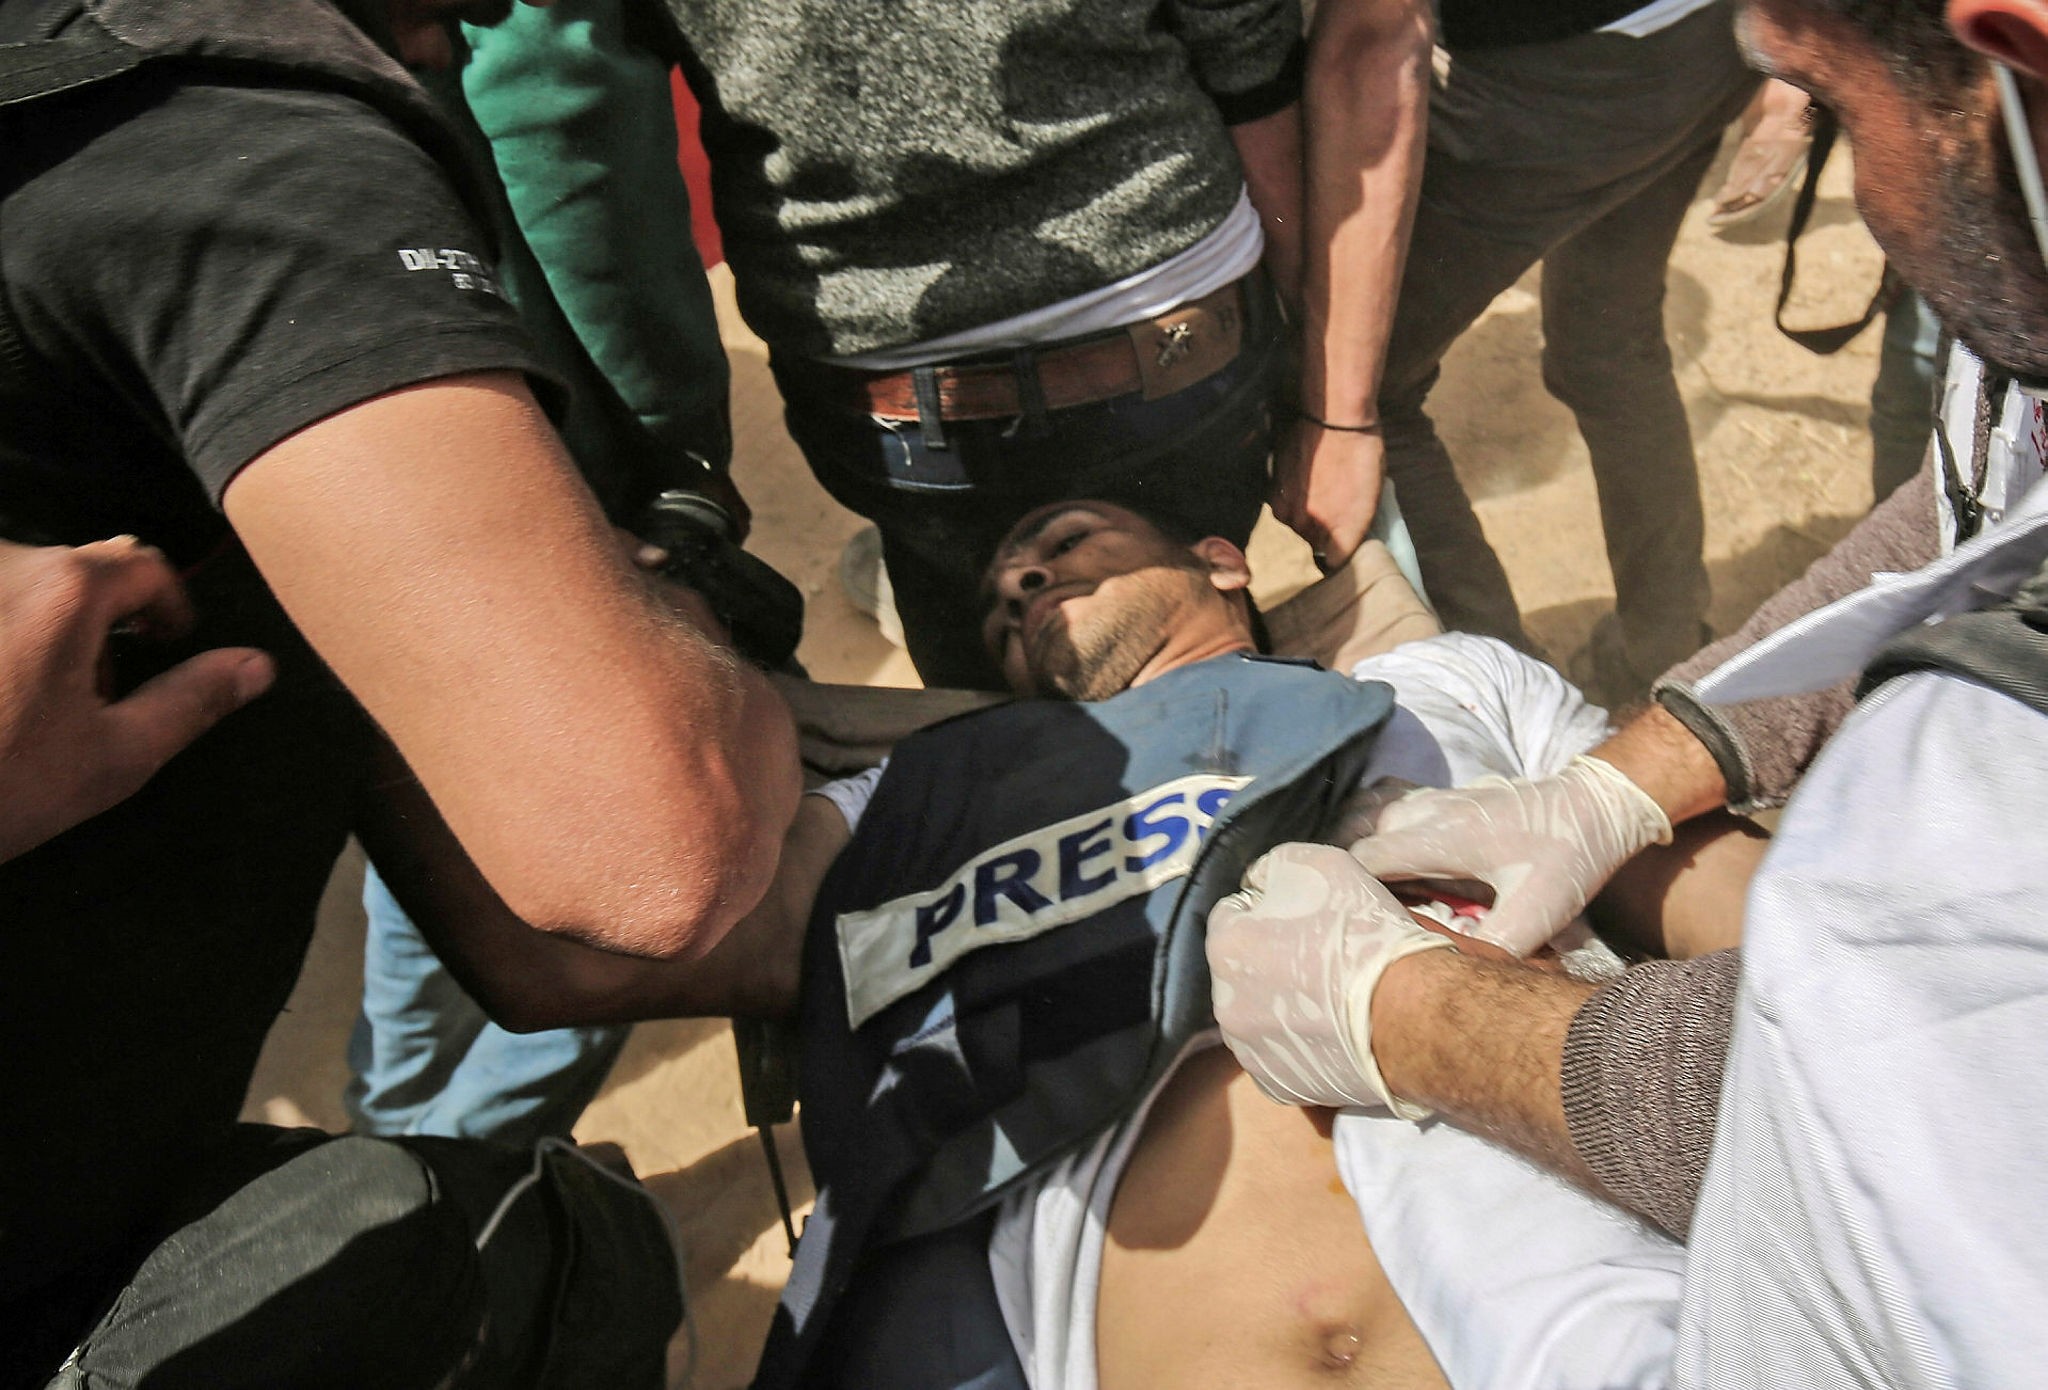 Demonstrators assist an injured Palestinian journalist Yasser Murtaja during clashes with Israeli security forces following a protest near the border with Israel, east of Khan Yunis, in the southern Gaza Strip, on April 6, 2018. (AFP Photo)